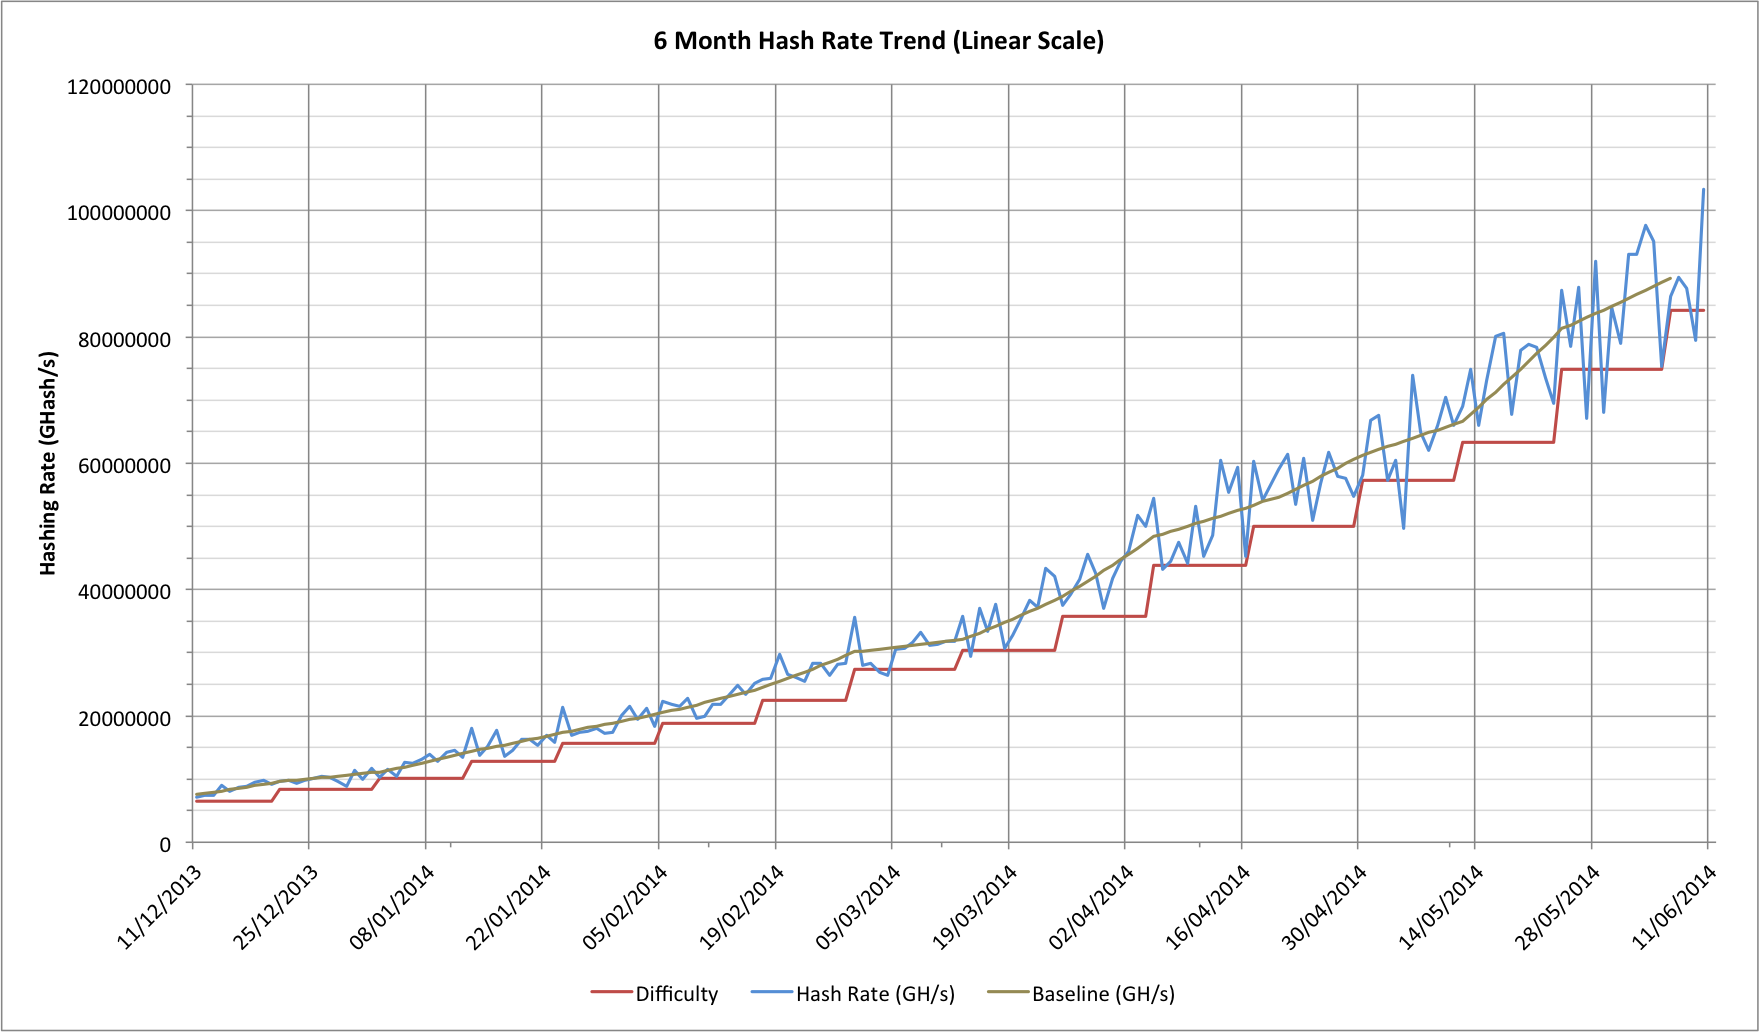 Bitcoin hash rate for the last 6 months (June 2014) on a linear scale